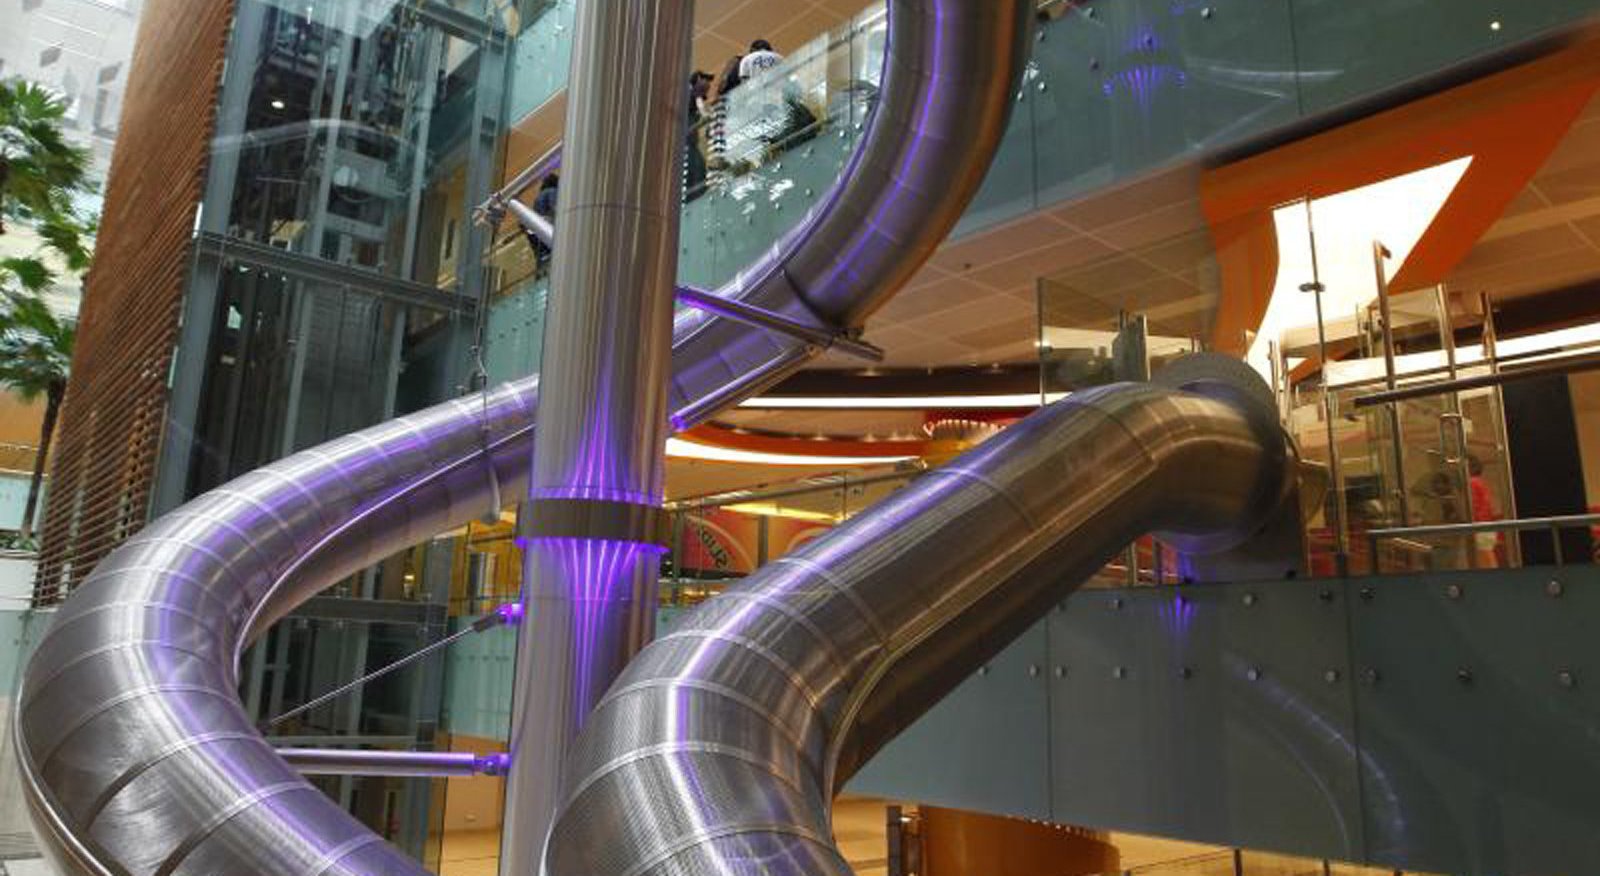 Singapore’s Changi airport has a massive slide that will take you directly to your boarding gate